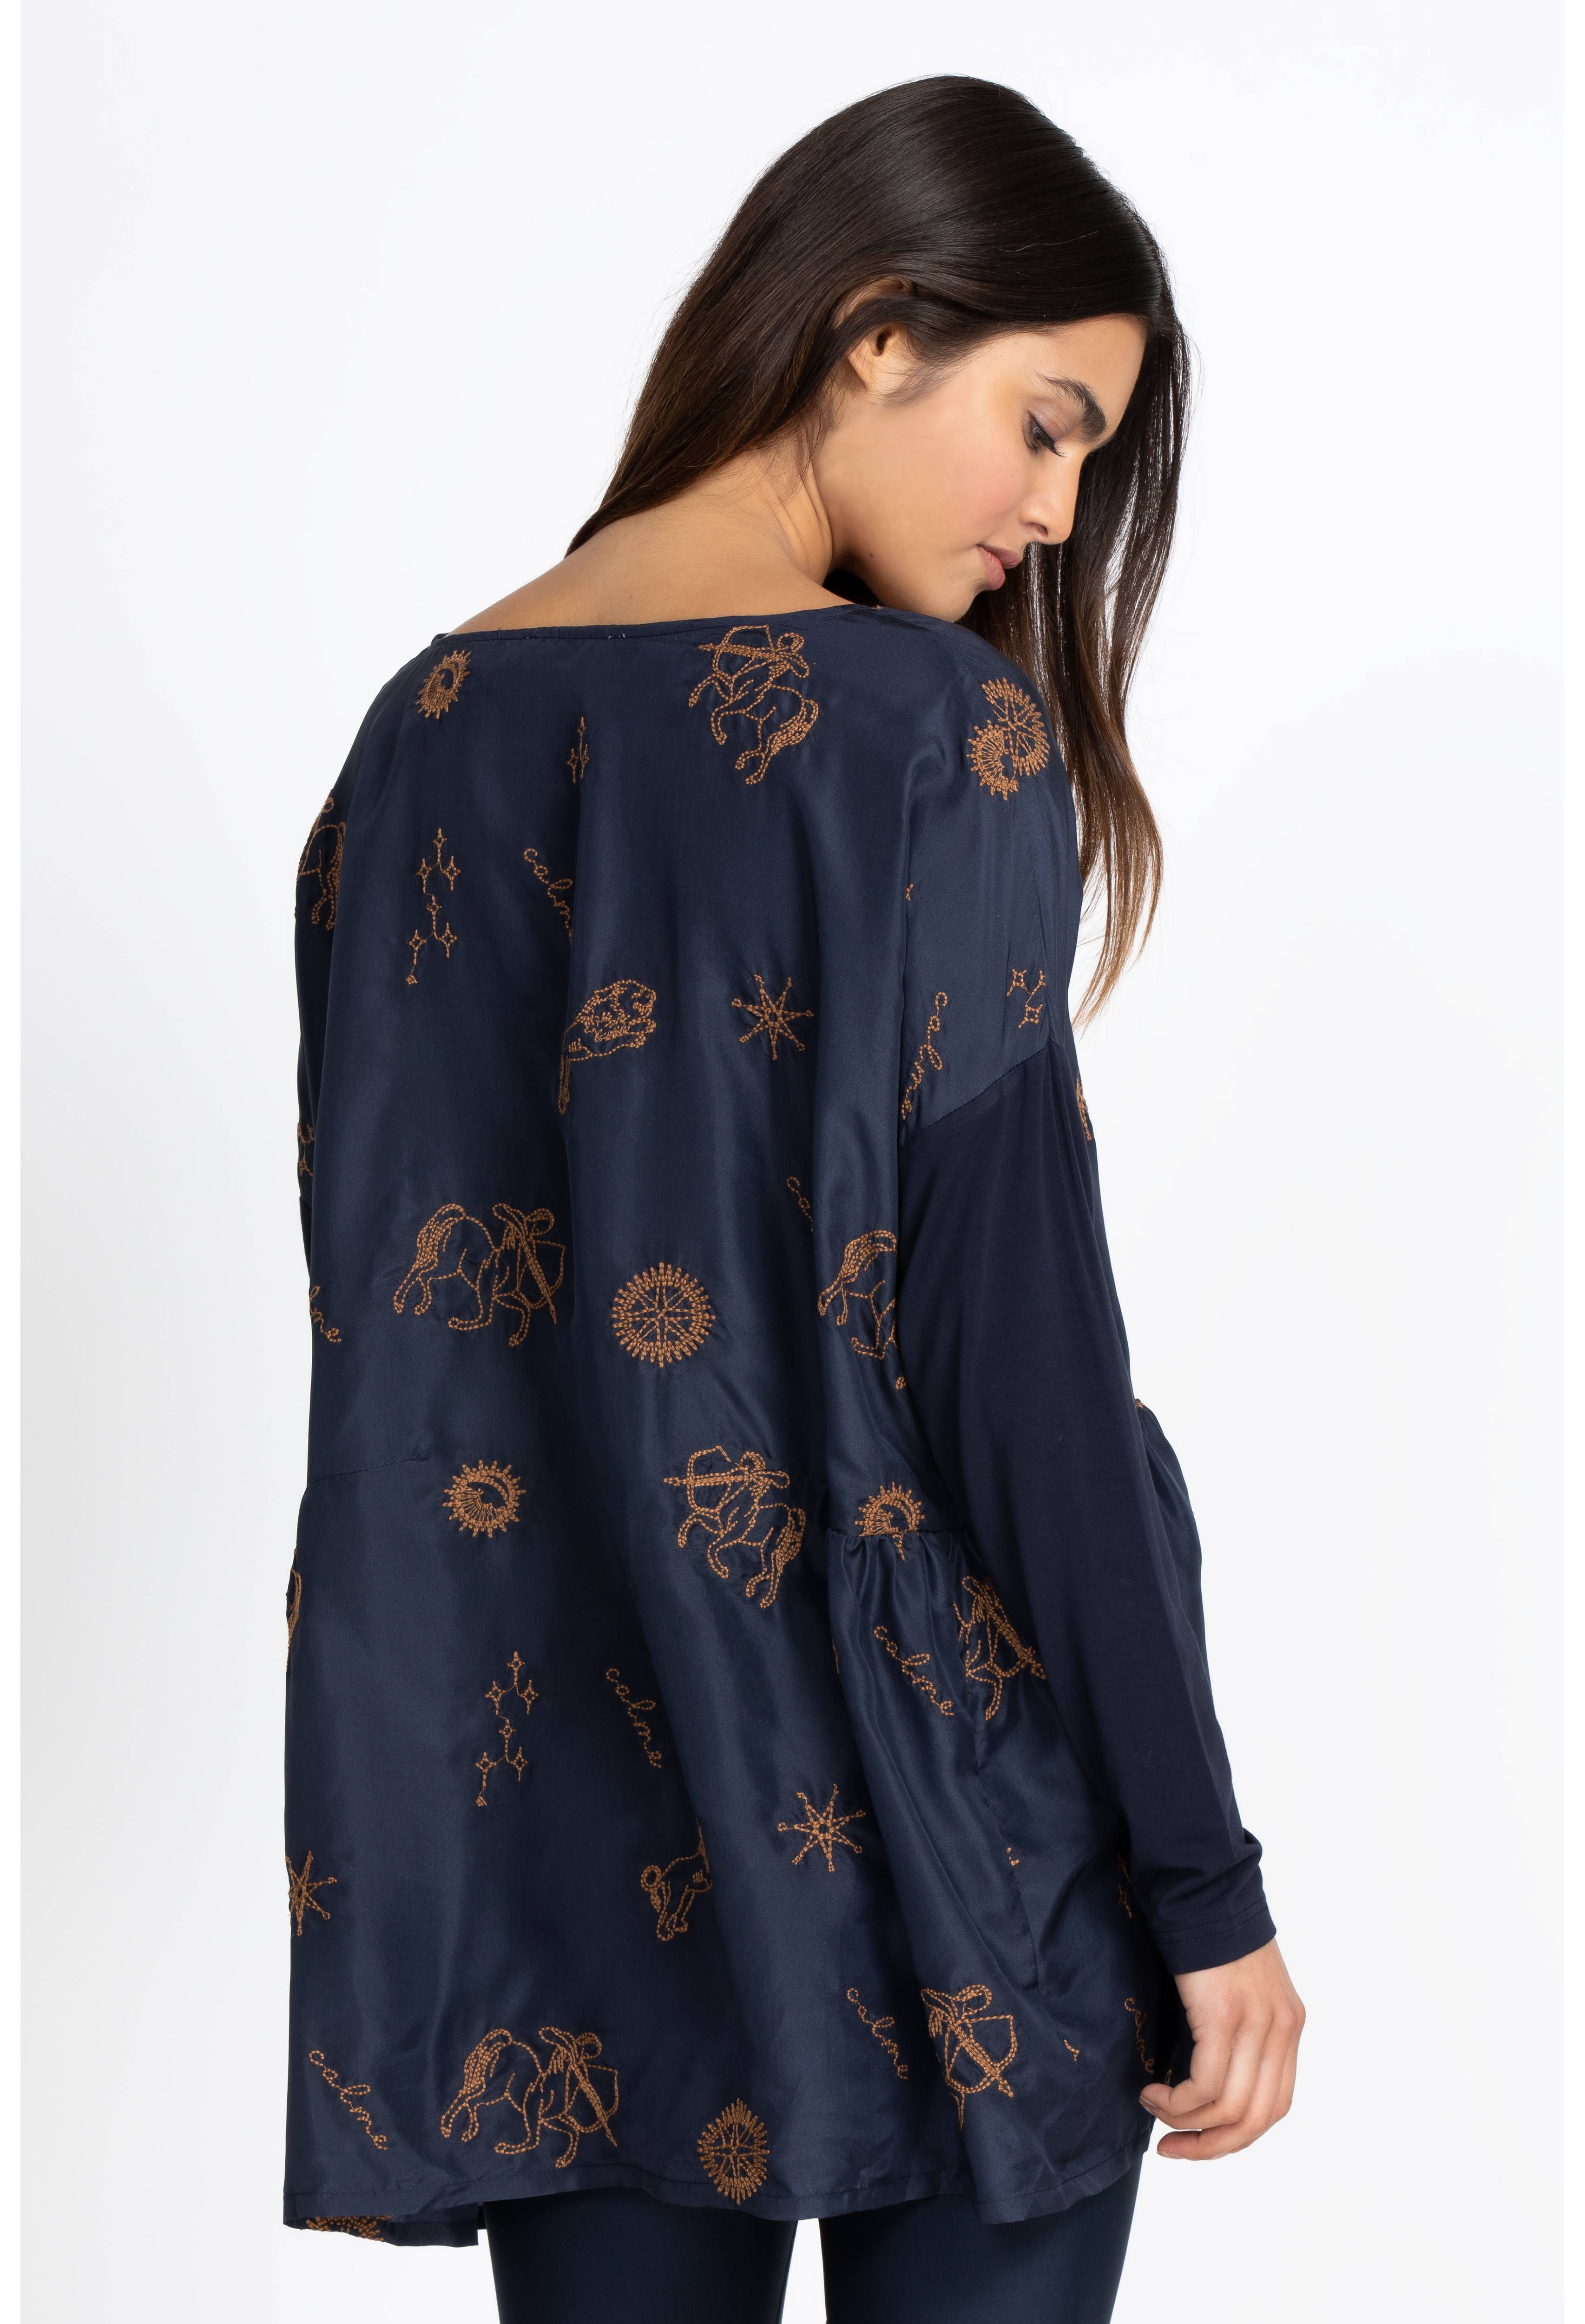 Astrology Embroidered Blouse, , large image number 3